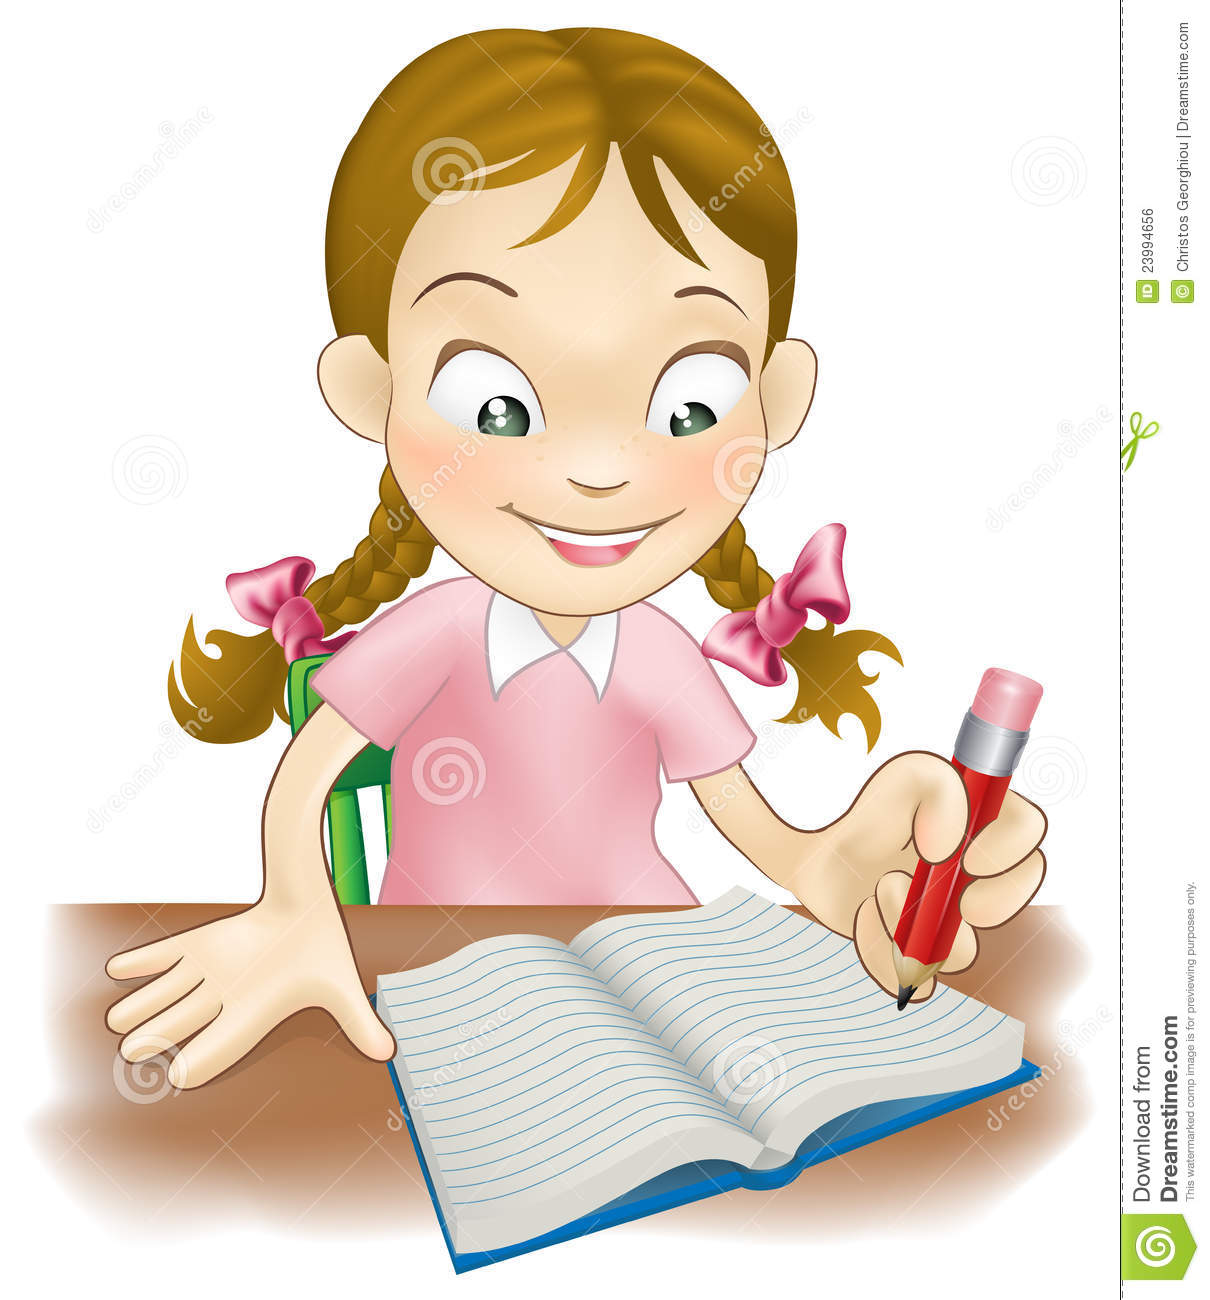 Young Girl Writing In A Book Royalty Free Stock Image   Image    